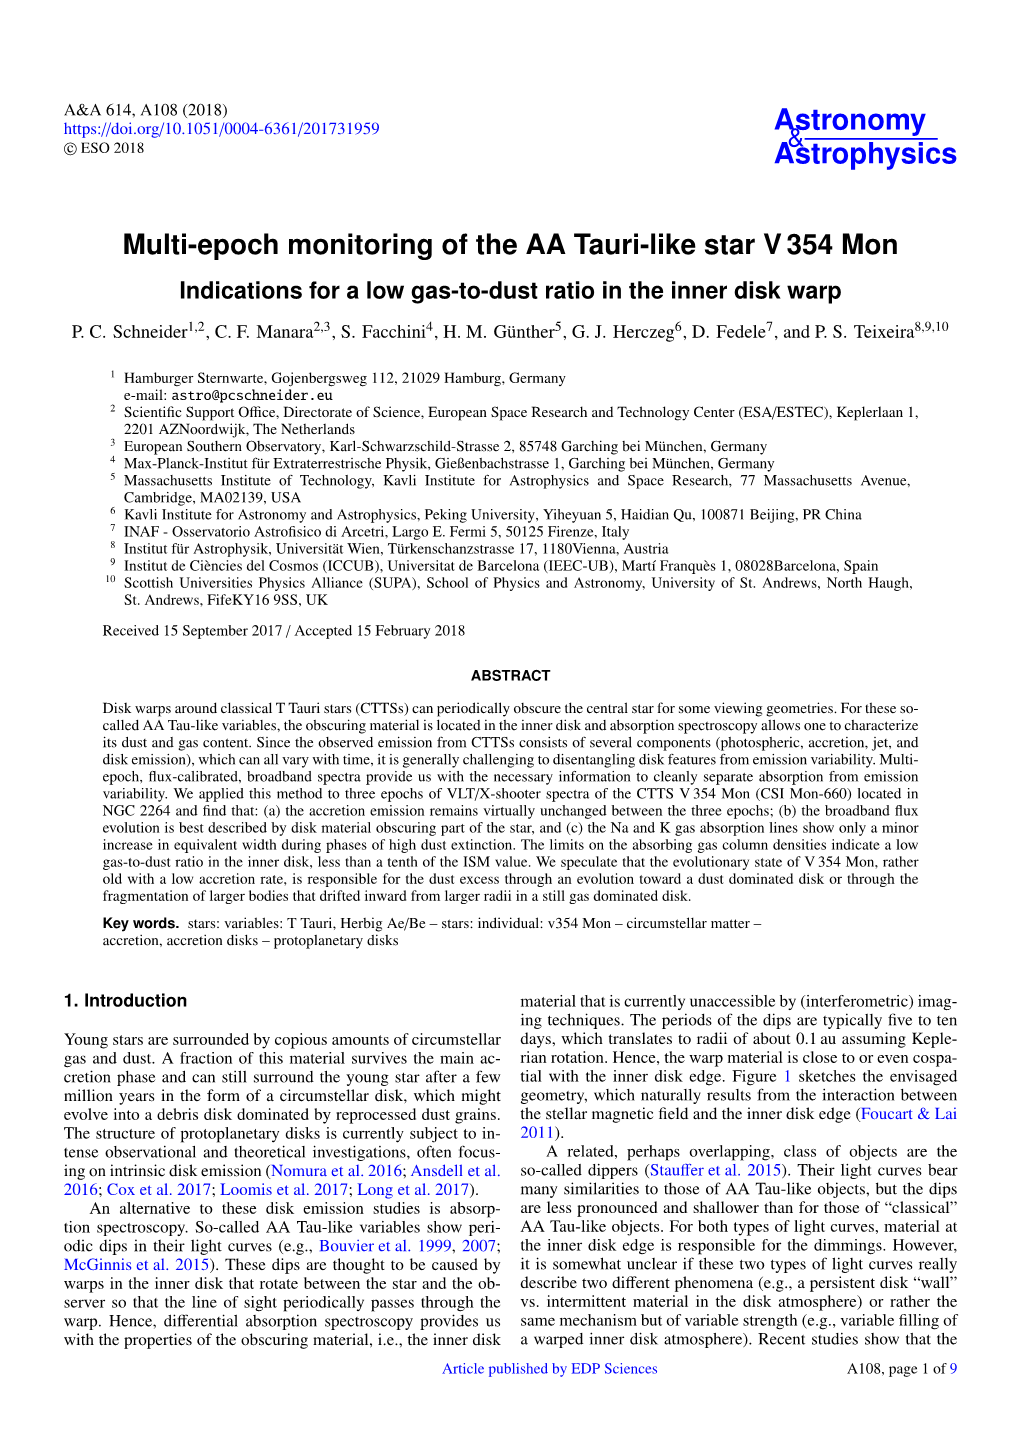 Multi-Epoch Monitoring of the AA Tauri-Like Star V 354 Mon Indications for a Low Gas-To-Dust Ratio in the Inner Disk Warp